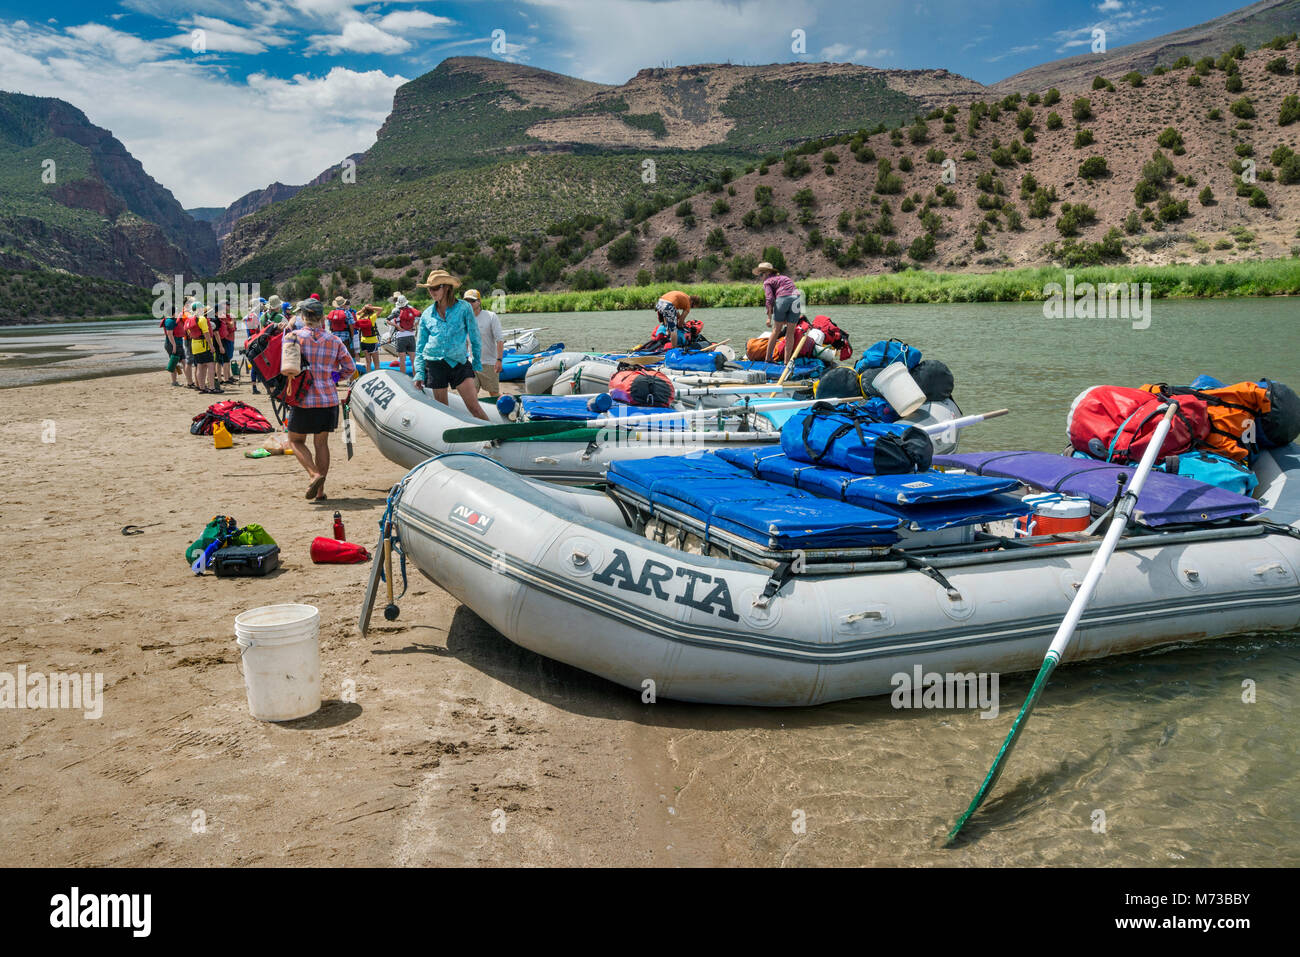 Preparing for rafting trip on Green River down Canyon of Lodore from Gates of Lodore, Dinosaur National Monument, Colorado, USA Stock Photo